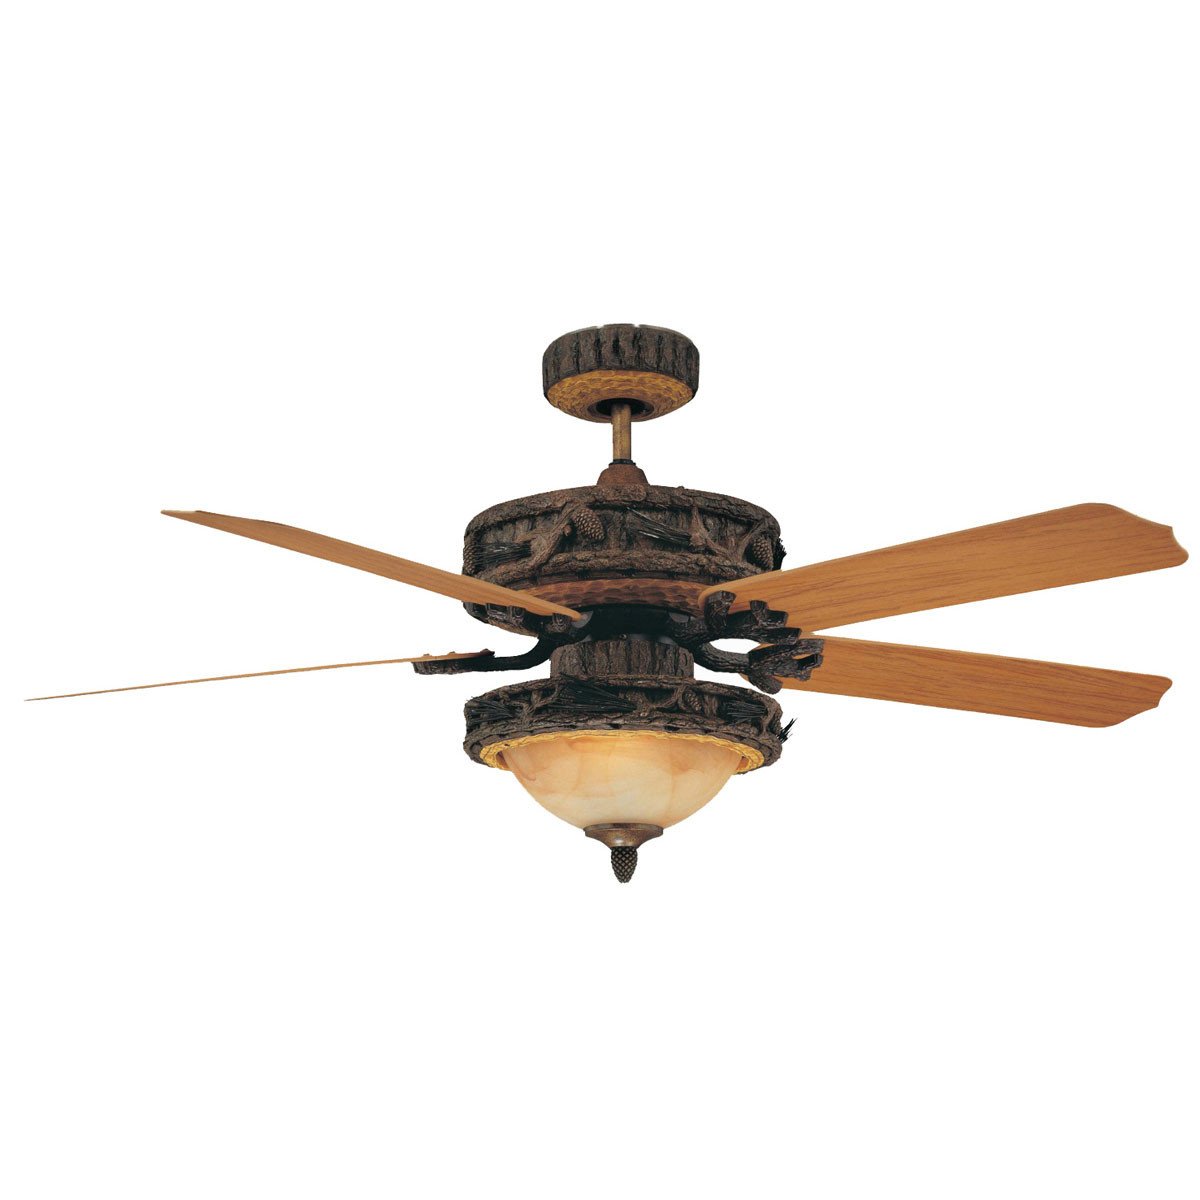 Concord Fans 52" Ponderosa Old World Leather Outdoor Ceiling Fan with Light